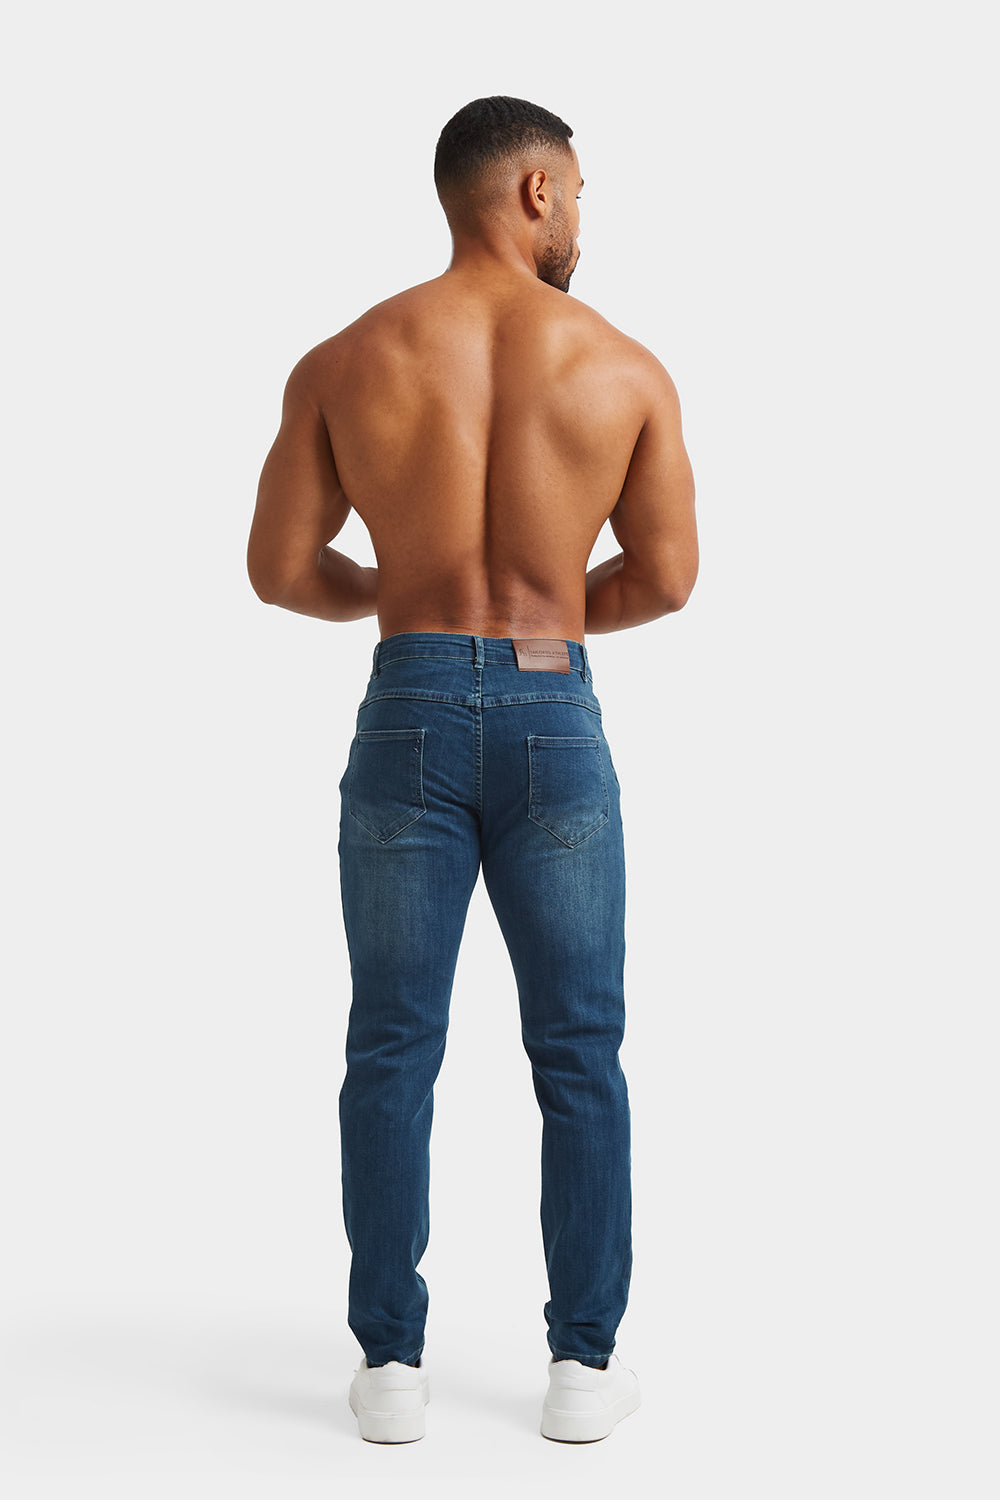 Athletic ATHLETE - - Fit Jeans Mid Blue in TAILORED USA